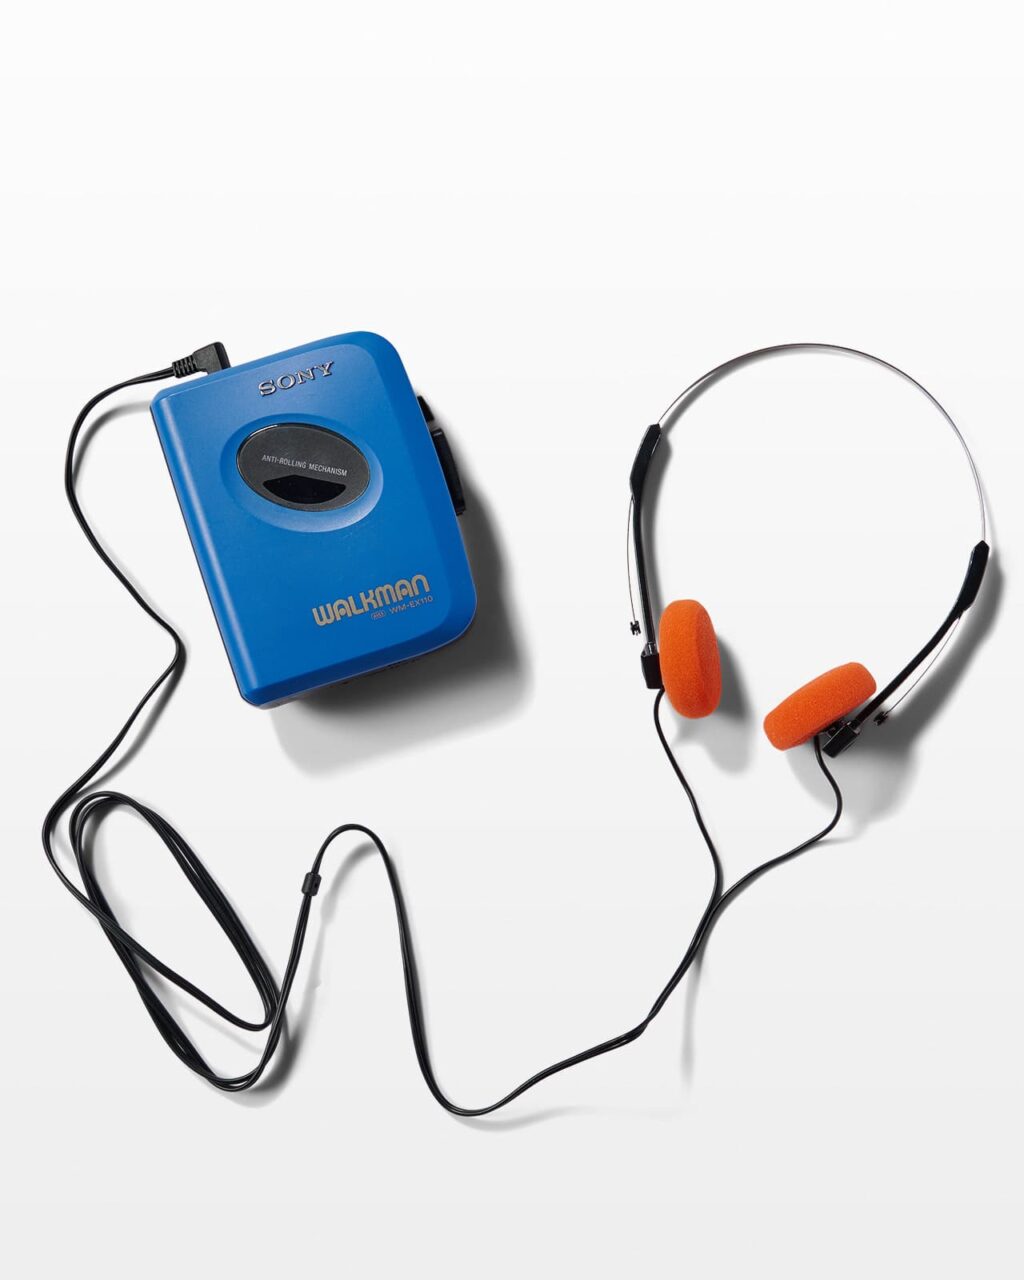 The history of the Walkman: 35 years of iconic music players - The Verge